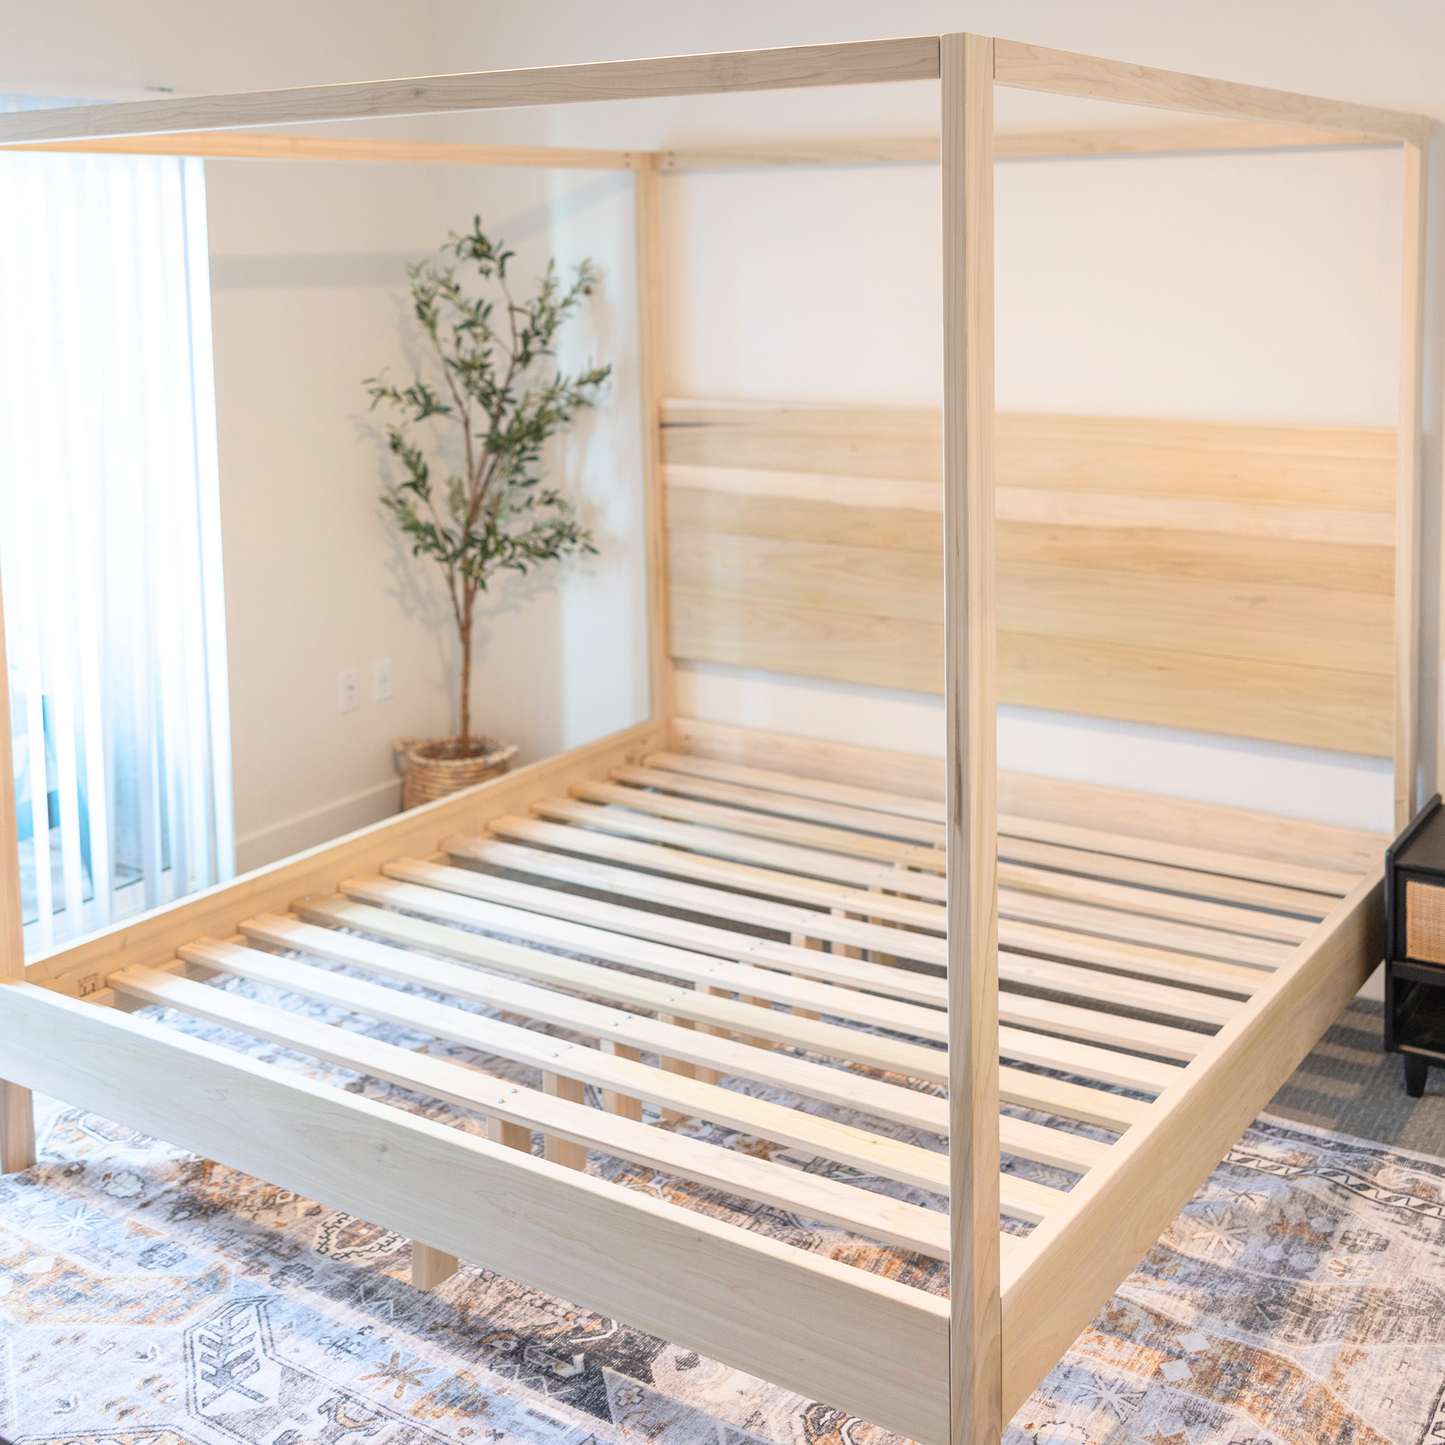 A solid poplar wood canopy bed, showcasing elegant craftsmanship and timeless design. The bed frame is constructed from sturdy poplar wood with a rich finish, featuring a classic canopy design that adds sophistication to any bedroom space.